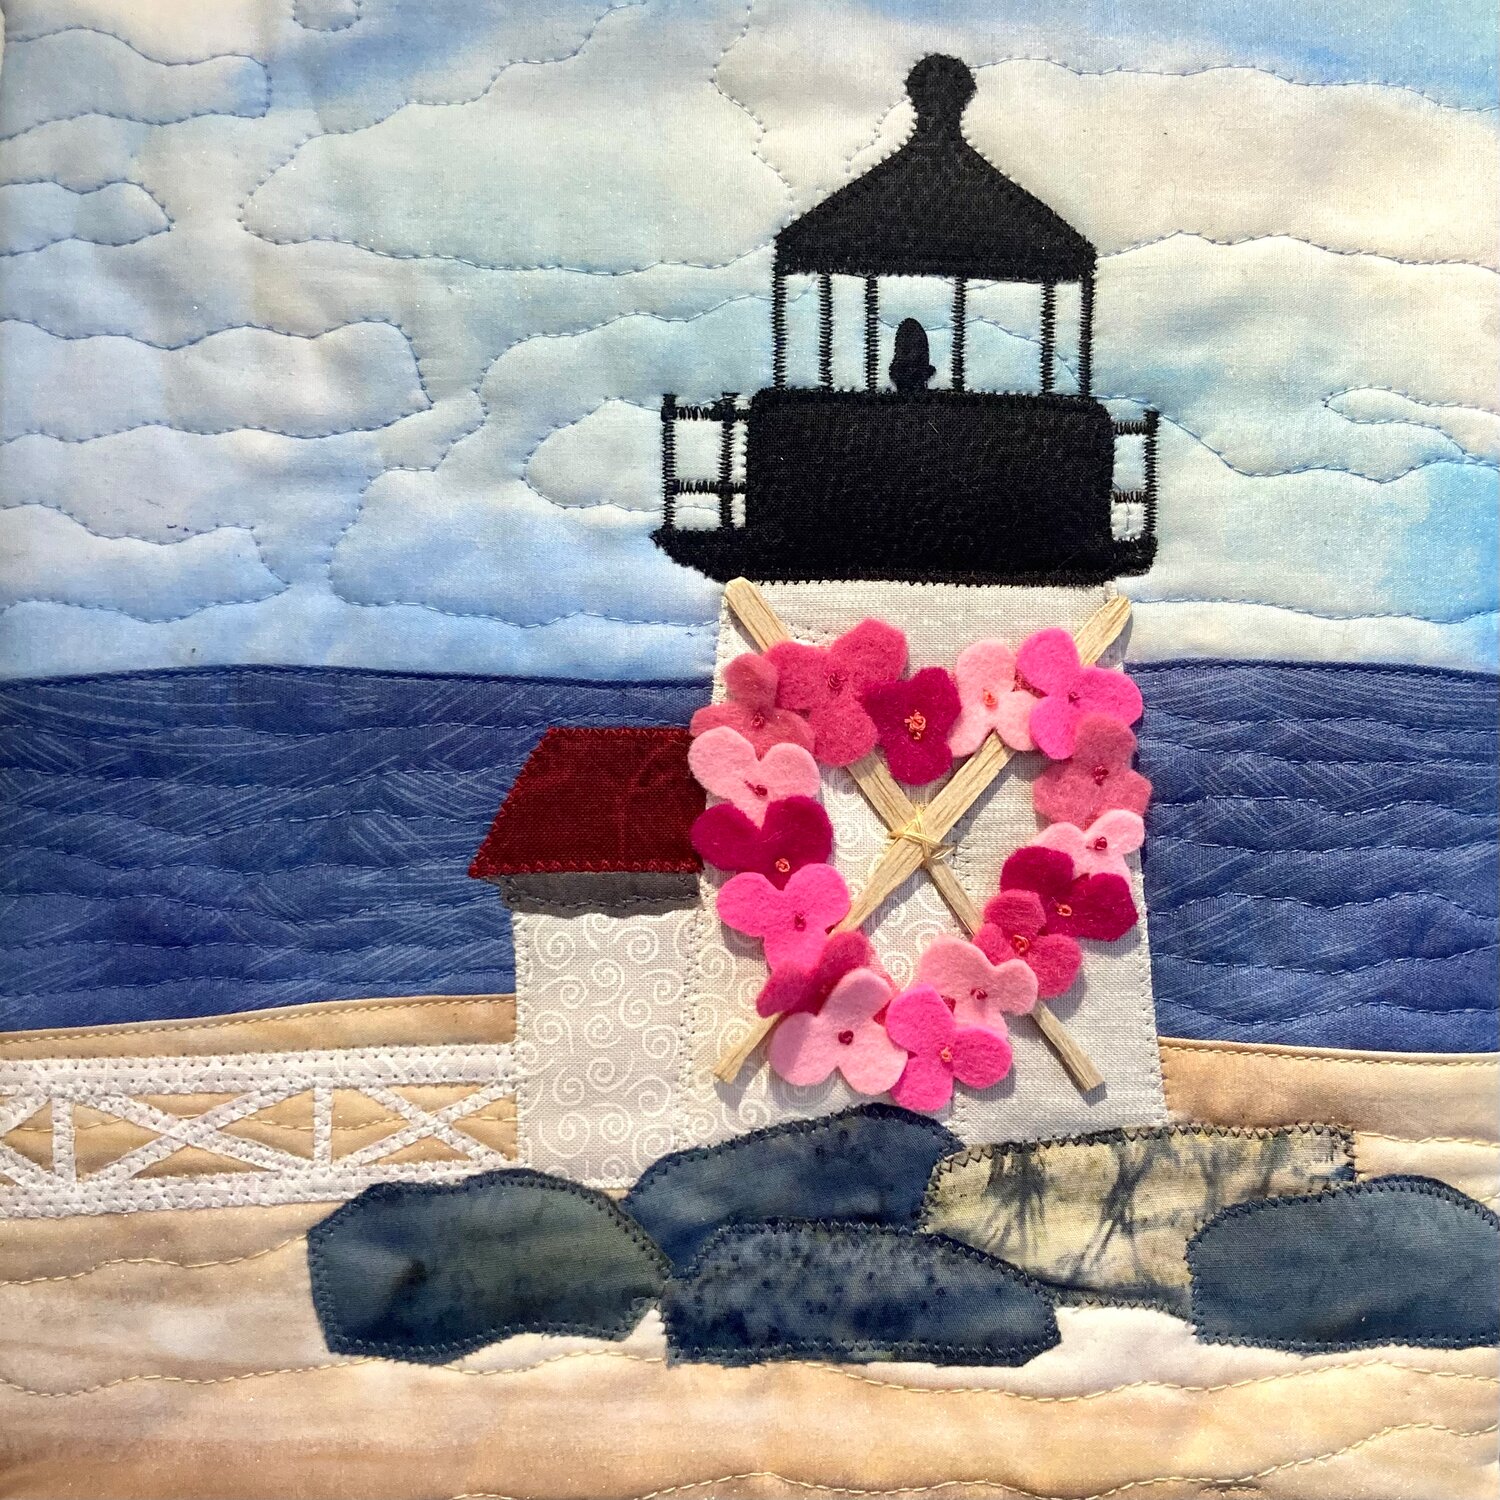 "Valentine's Brant Point" by Tricia Deck